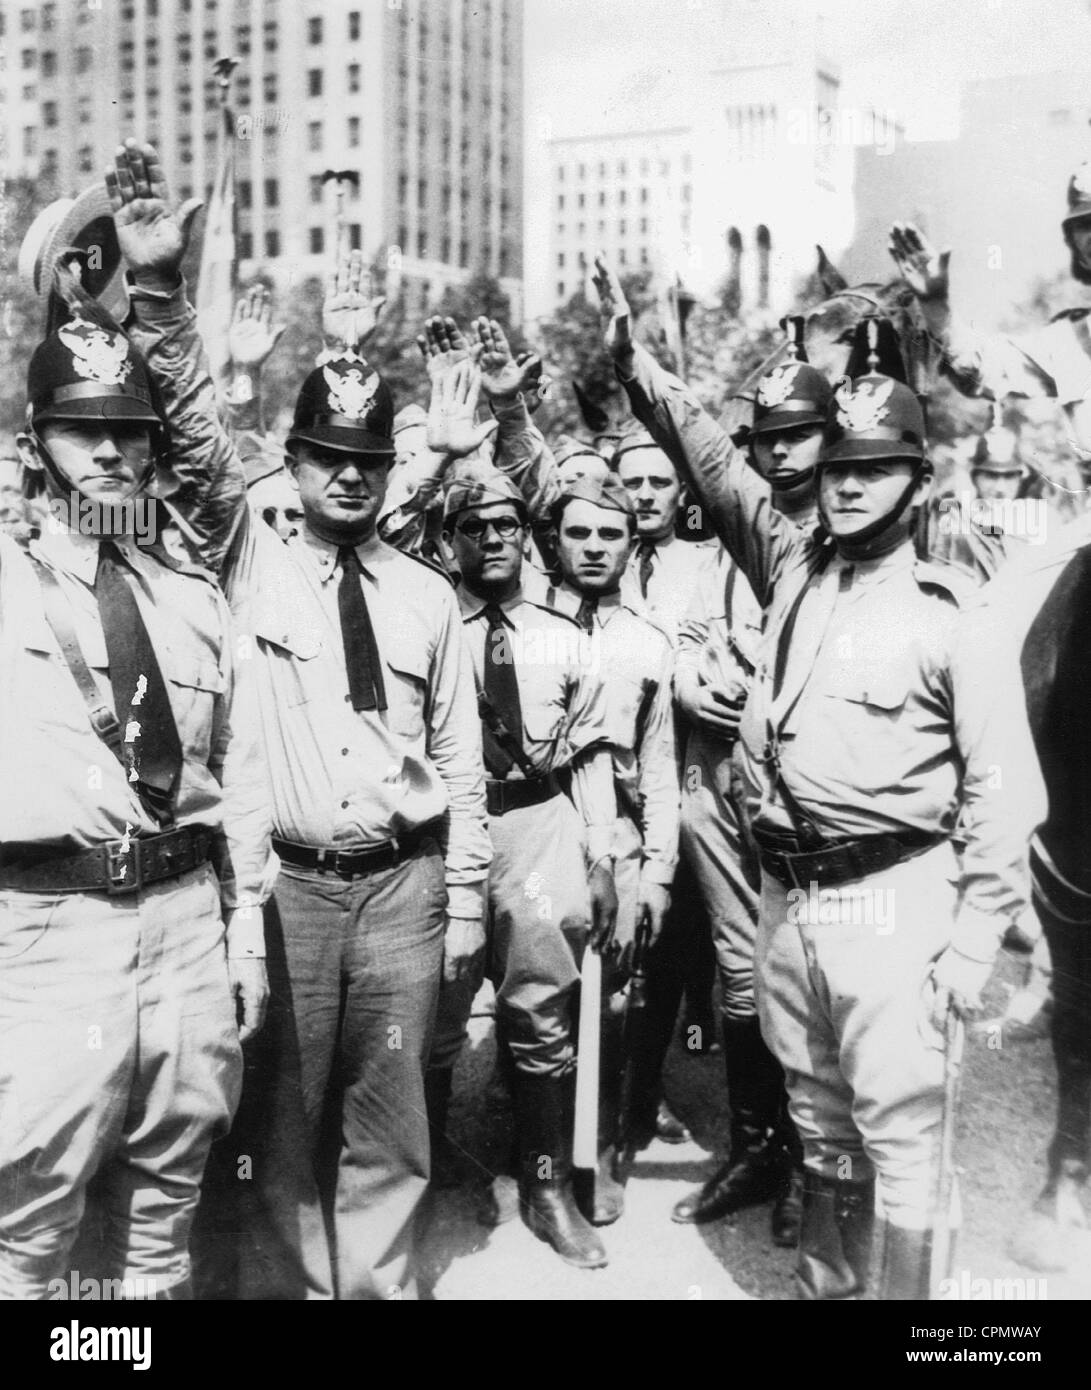 American fascists giving the fascist salute, 1933 Stock Photo